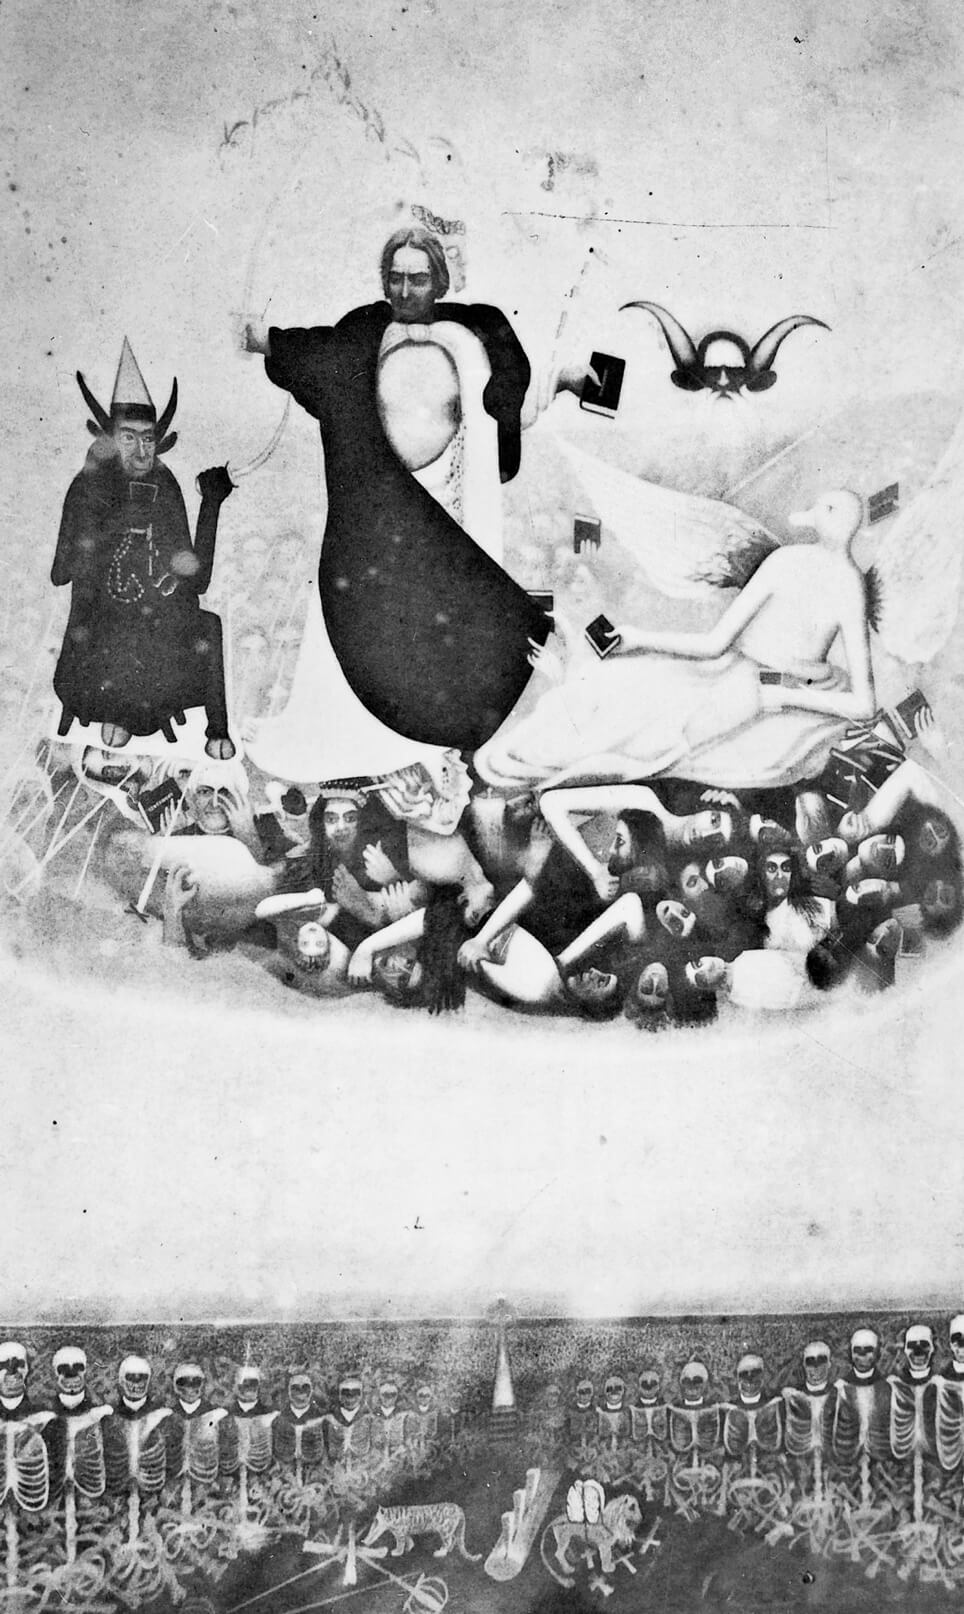 A reproduction of an undated painting by John Ballou Newbrough lost in a flood while in storage in El Paso, Texas. The complex iconography of the painting—said to be seventeen feet tall and ten feet wide—depicted a central tenet of Oahspe’s theology: that Christianity was founded when a powerful spirit usurped and distorted the teachings of the Jewish prophet Joshu slash Jesus. Sometimes referred to as The Three Worlds, the painting depicts the three realms outlined in Oahspe—the work’s lower third, where infinite rows of skeletons can be seen, depicts Corpor; a jumble of false God-Christ figures occupy the middle region, called Atmospherea; and the now-faded upper portion represents Etherea, the higher heavens. In the Etherea portion, the figures are a fusion with the animal or supernatural, their bodies not entirely human.